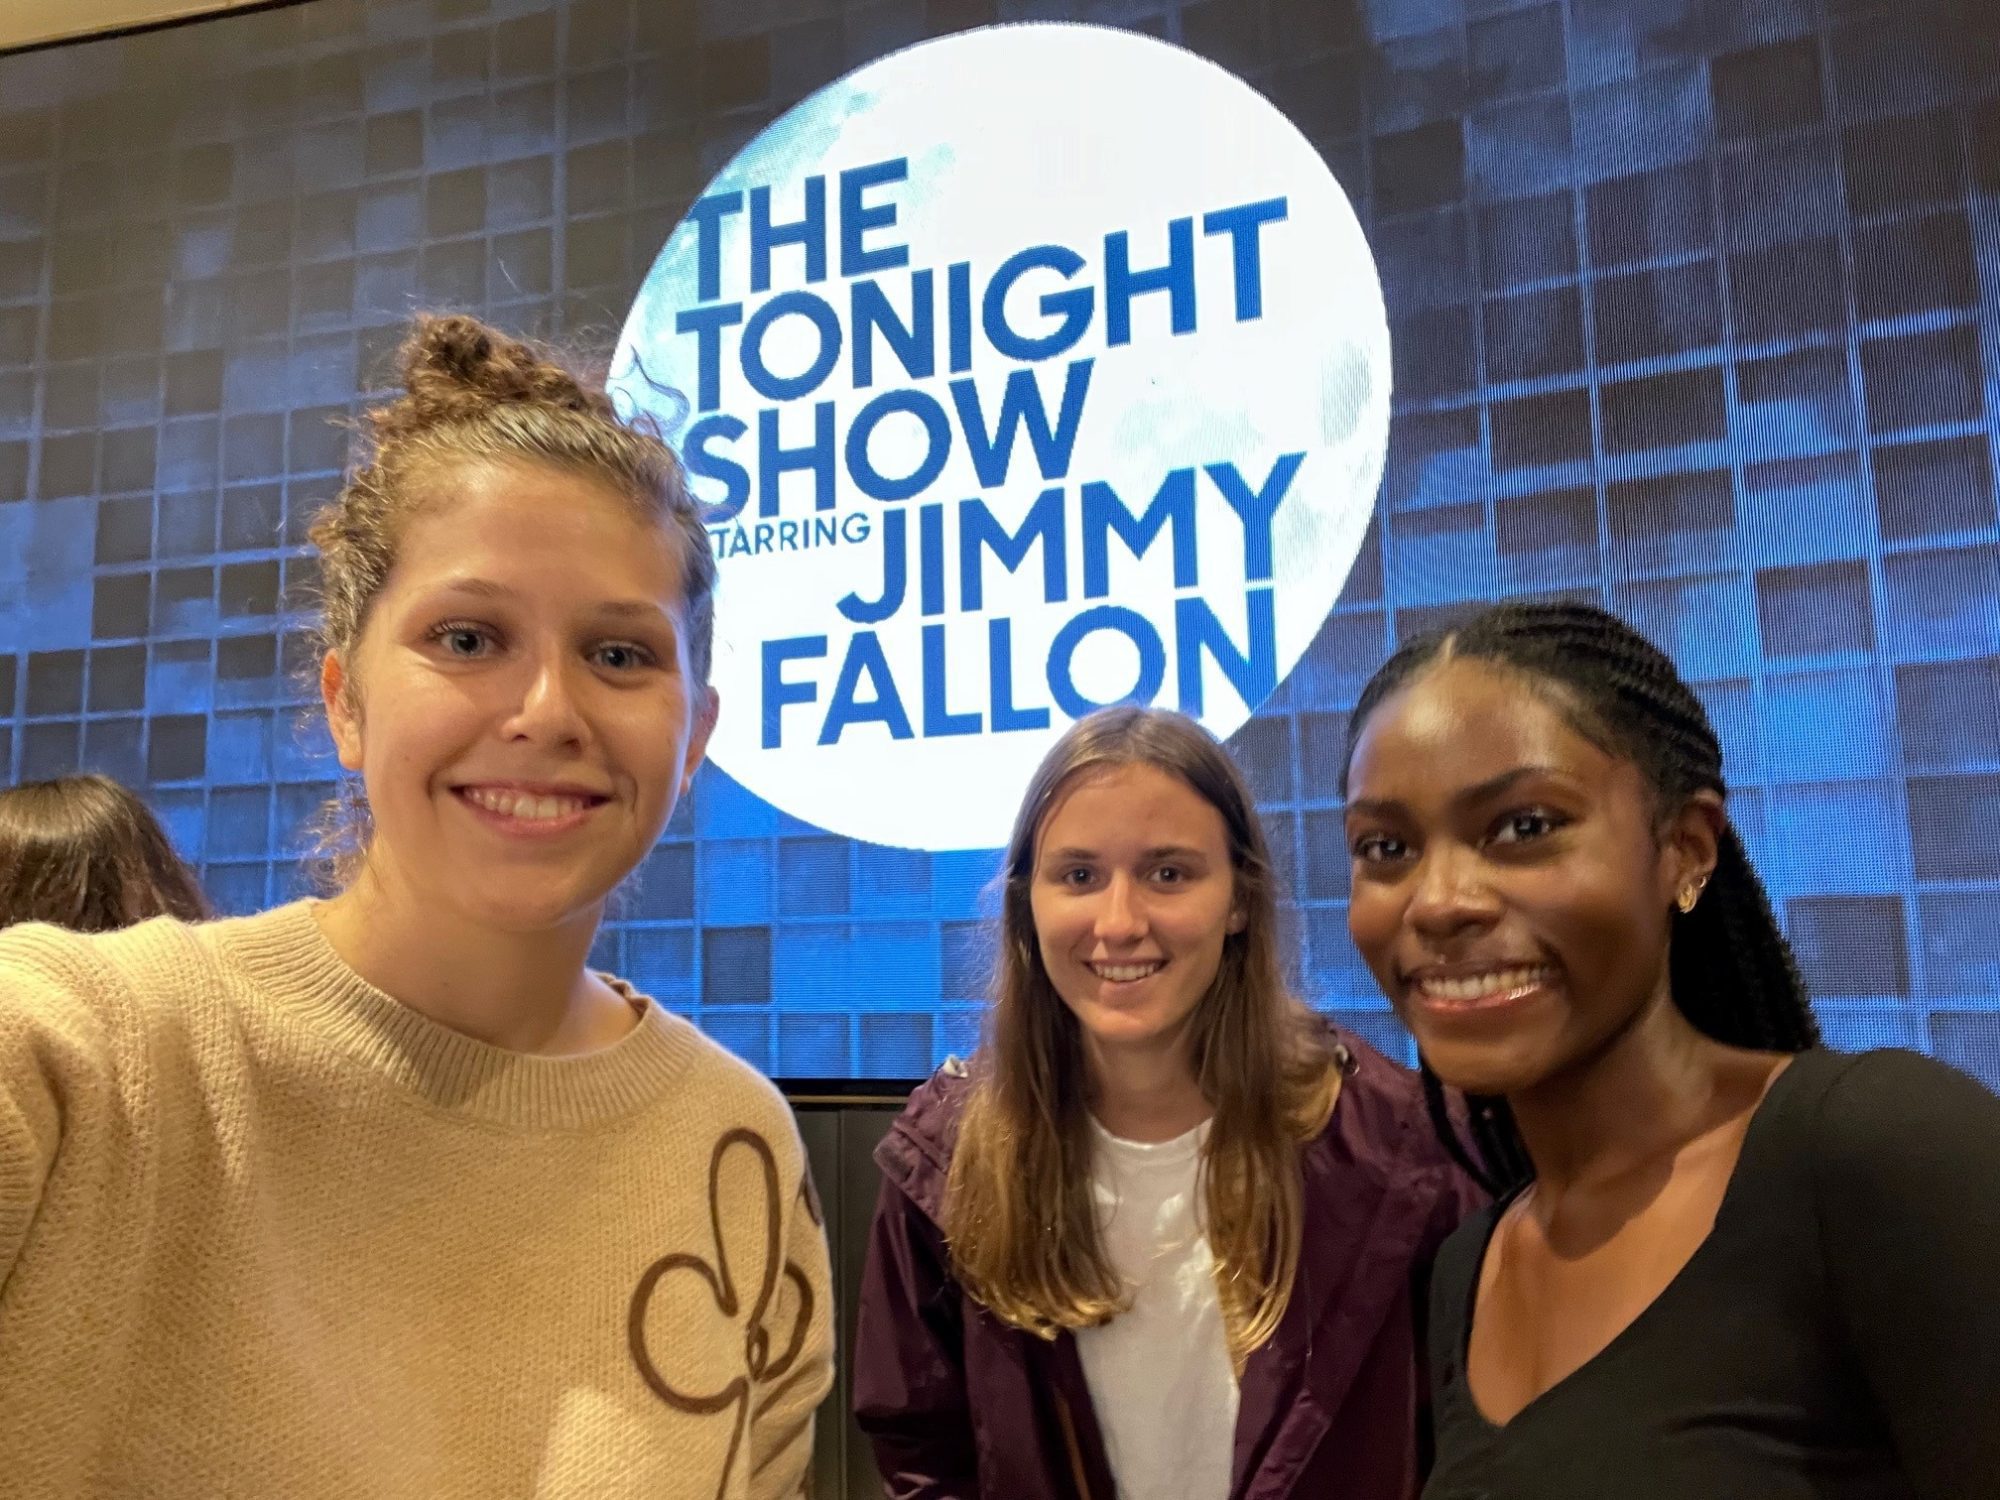 Students at the Tonight Show in New York City